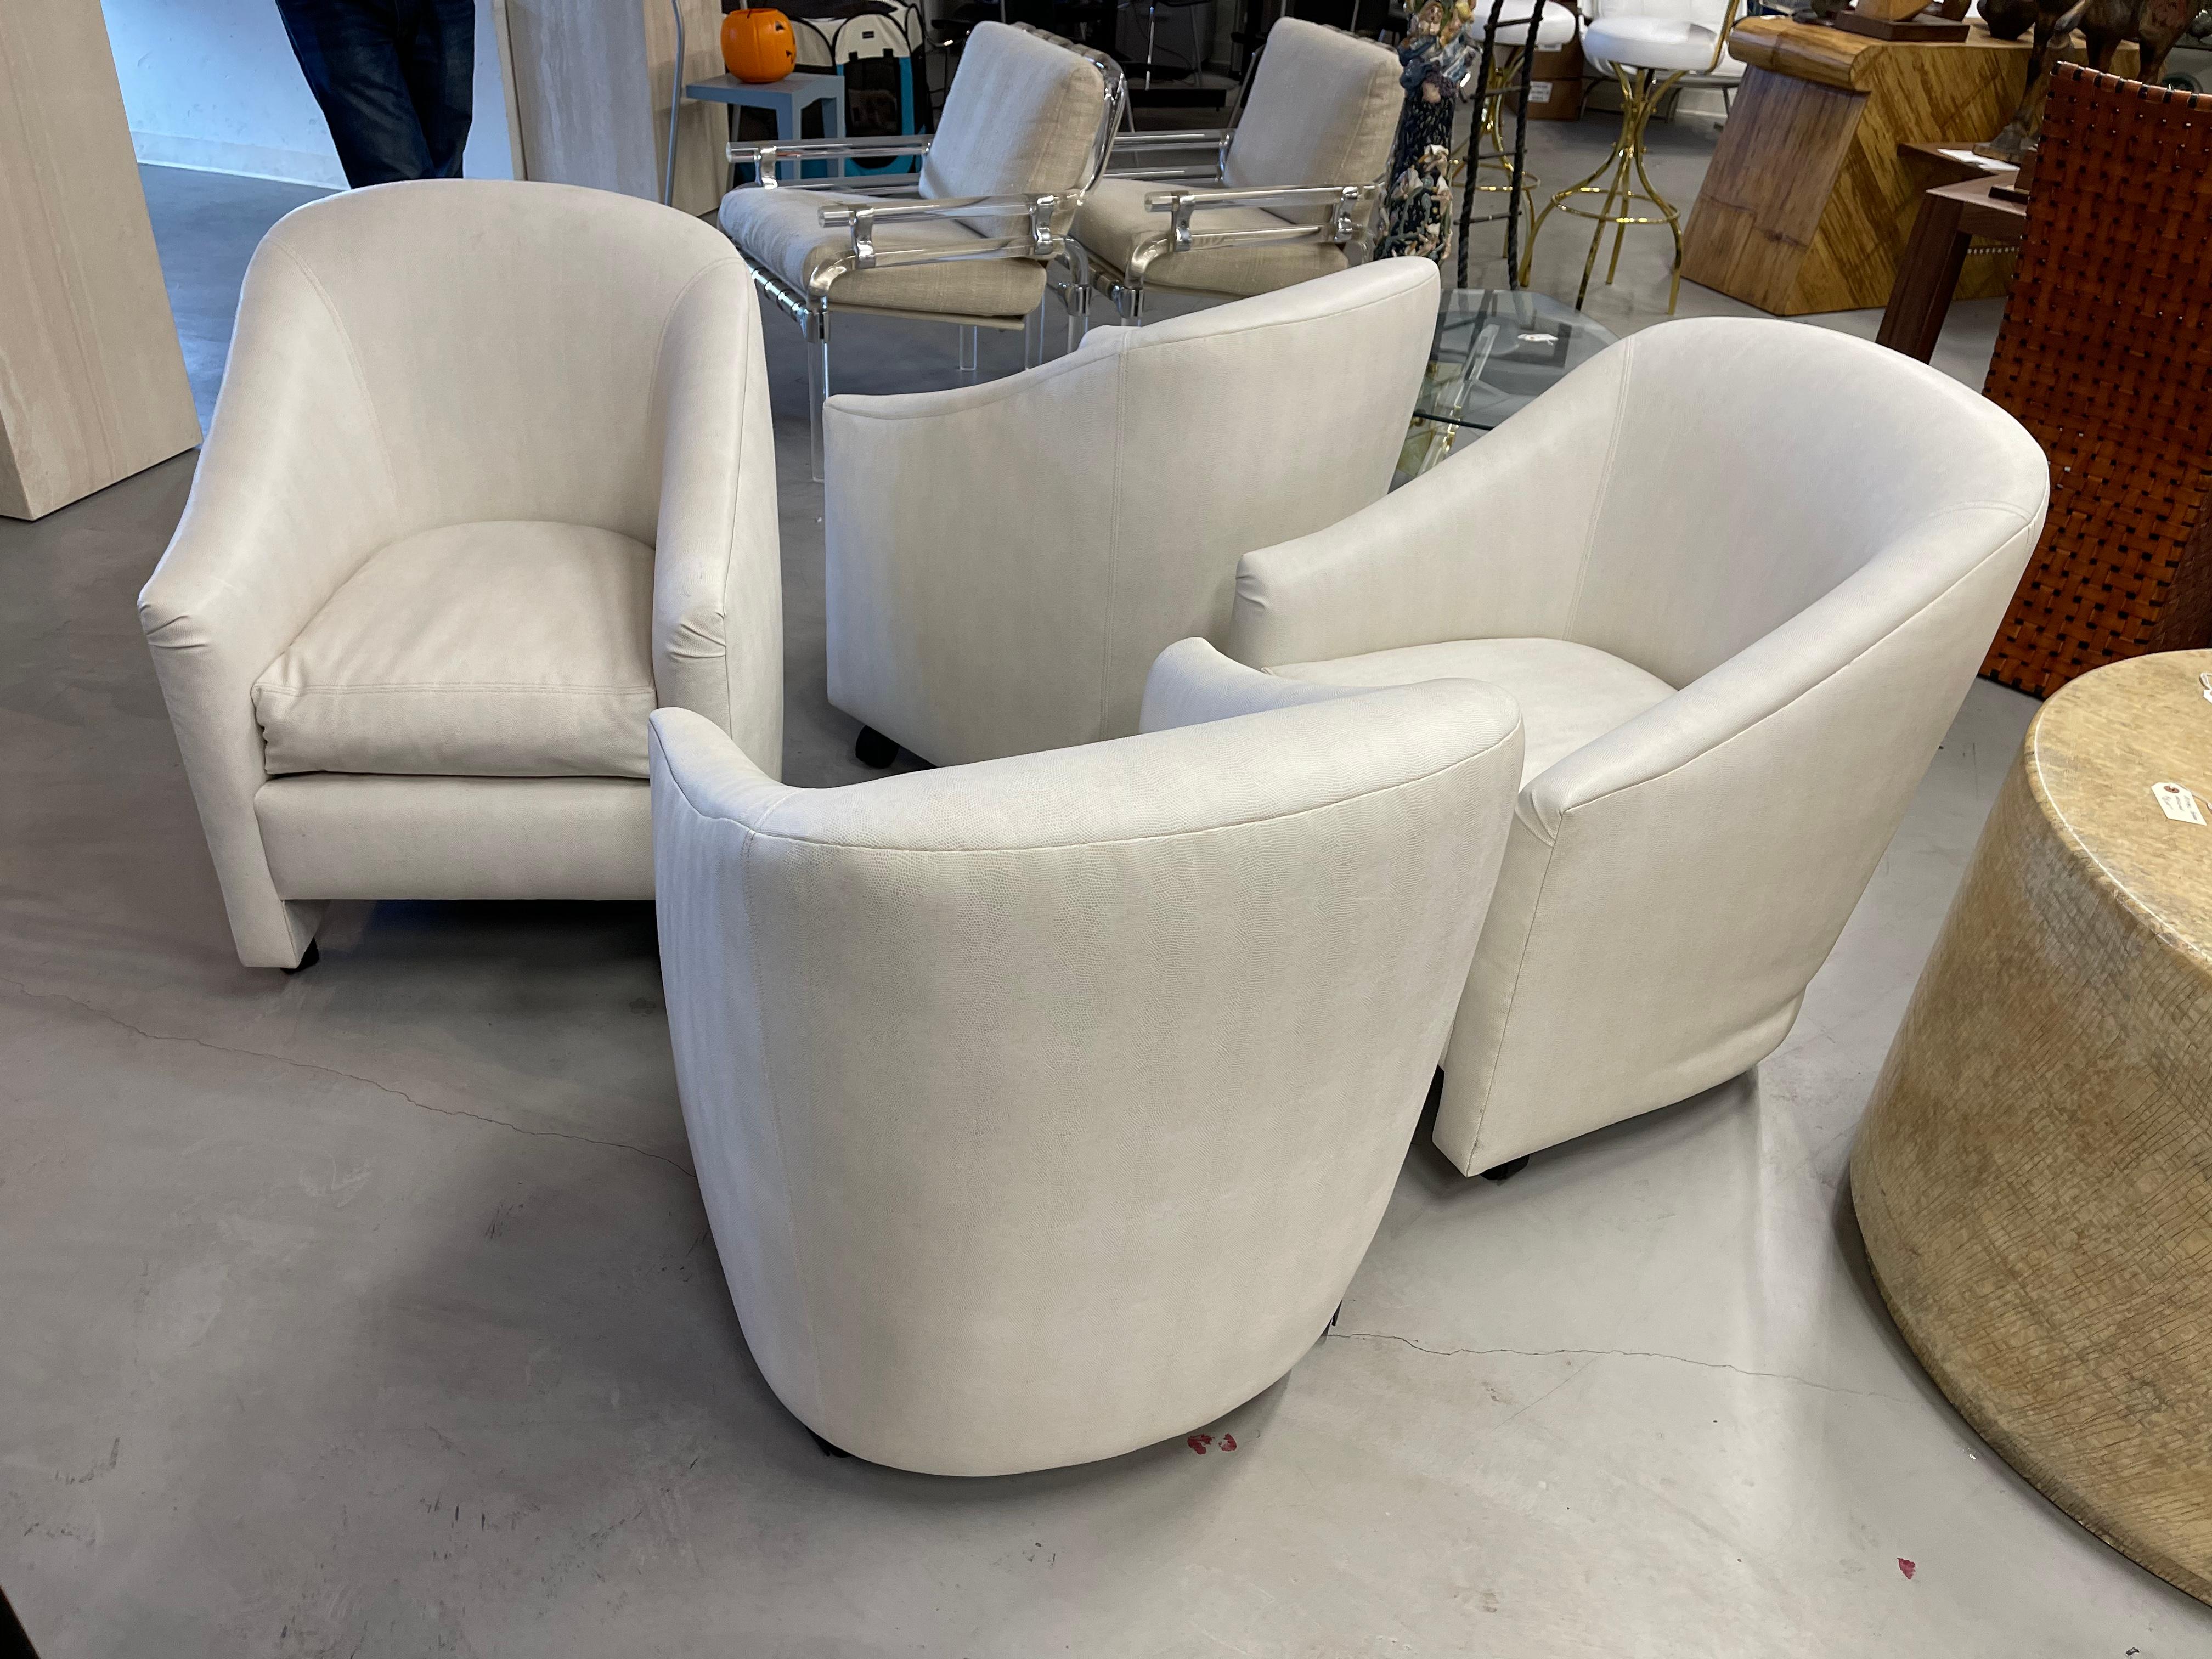 A nice set of 4 vinyl (we believe) chairs on castors. Perfect for a game table or small kitchen table. In a faux lizard pattern. The chairs are labeled A. Rudin. In good overall condition but the leather has some marks that may be cleanable.